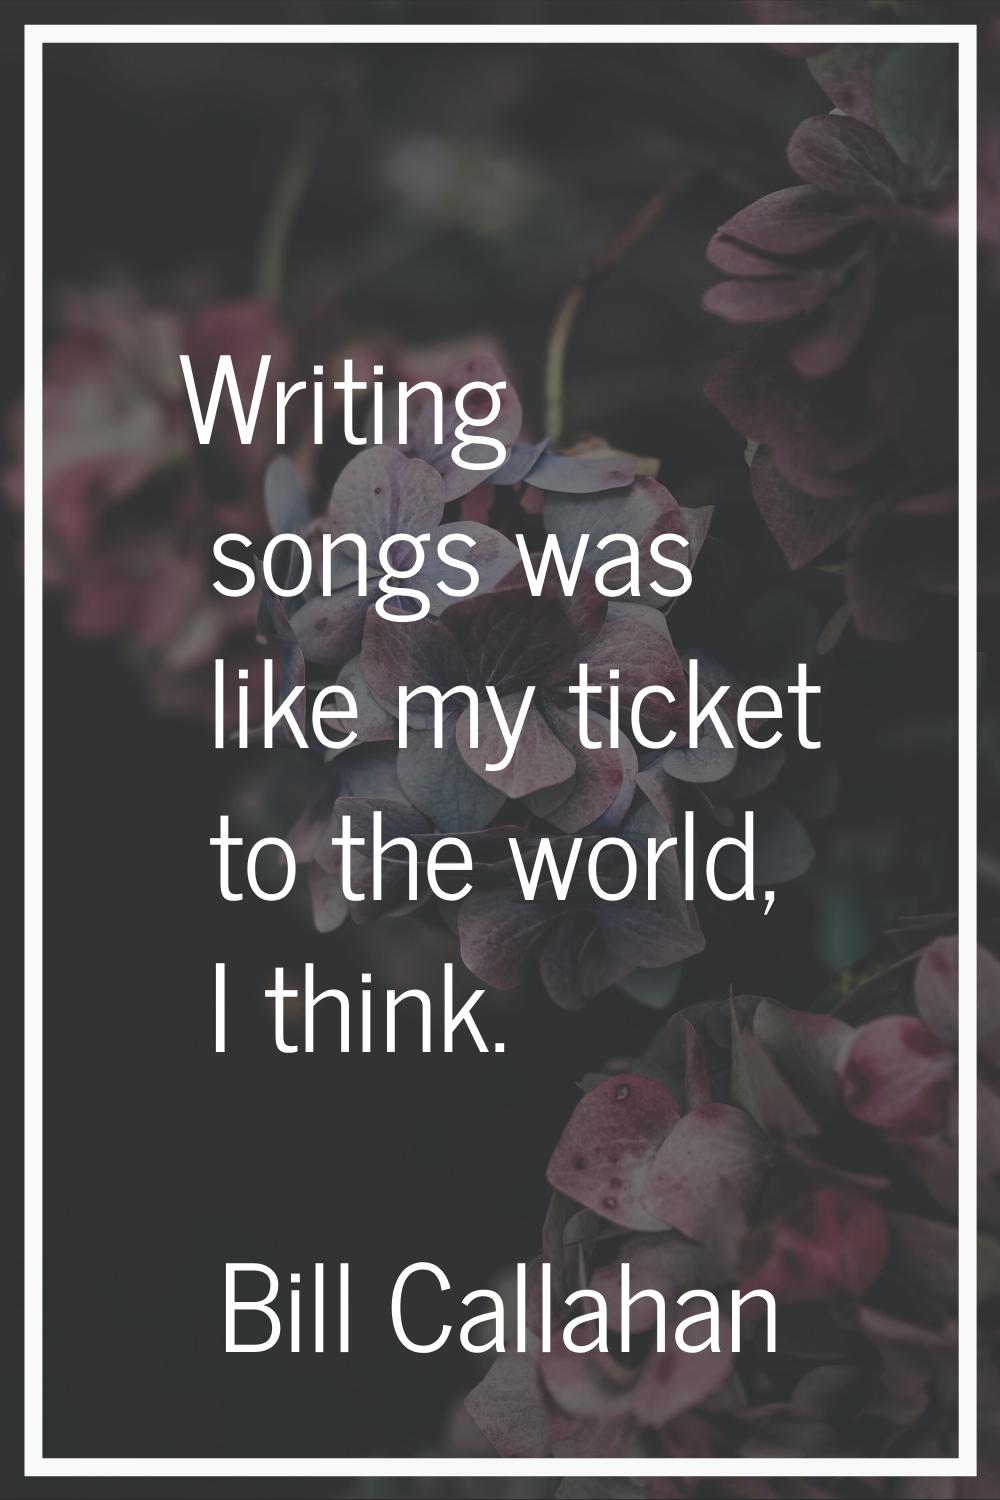 Writing songs was like my ticket to the world, I think.